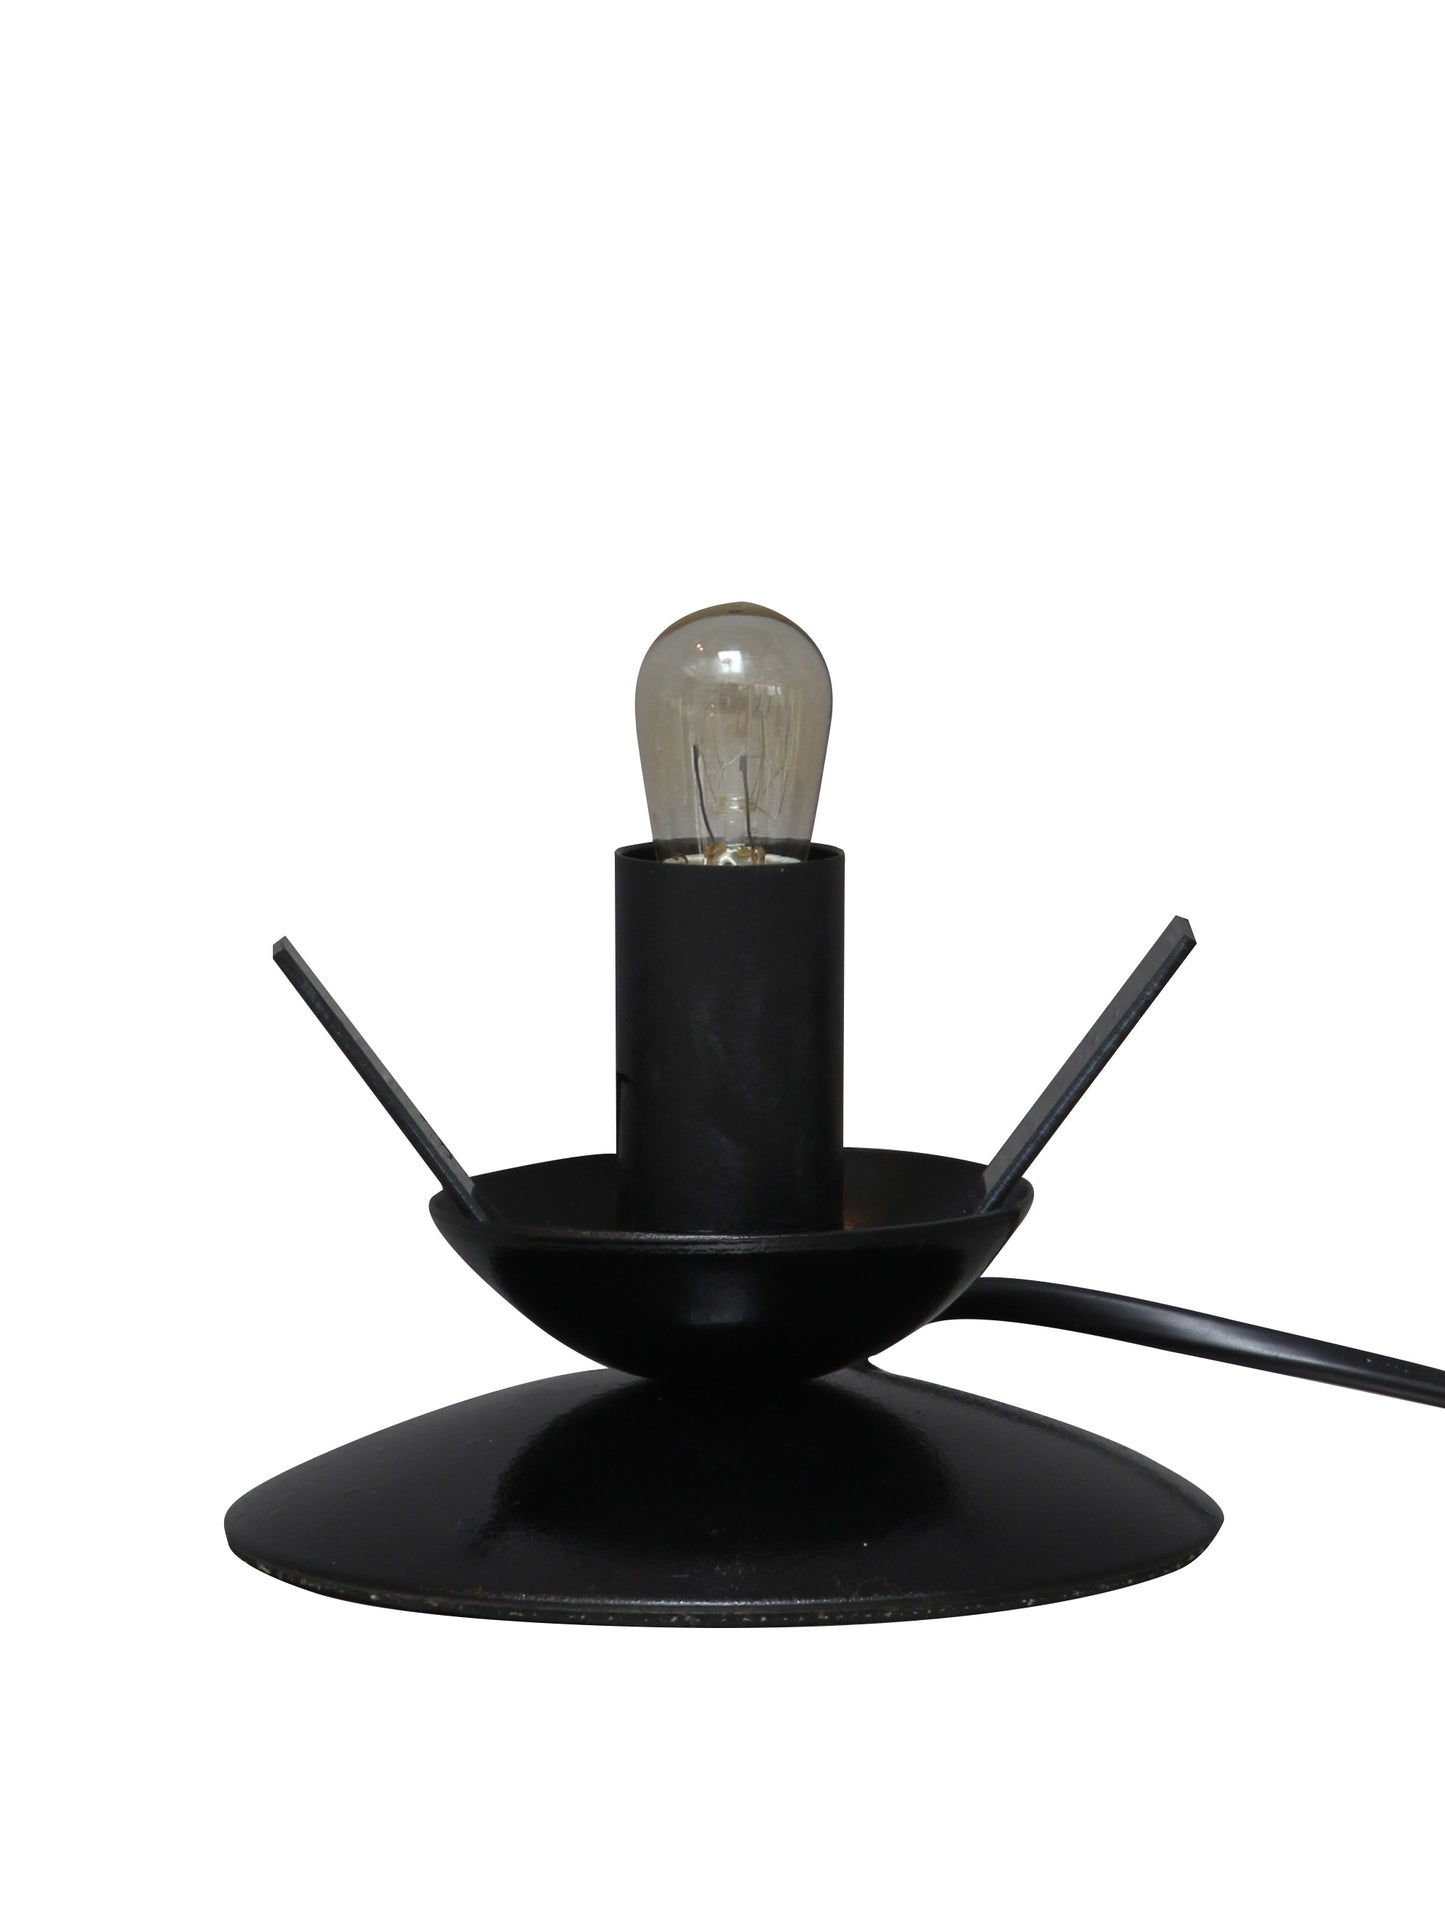 Mild Steel Ostrich egg lamp stand 0mm (excludes egg)